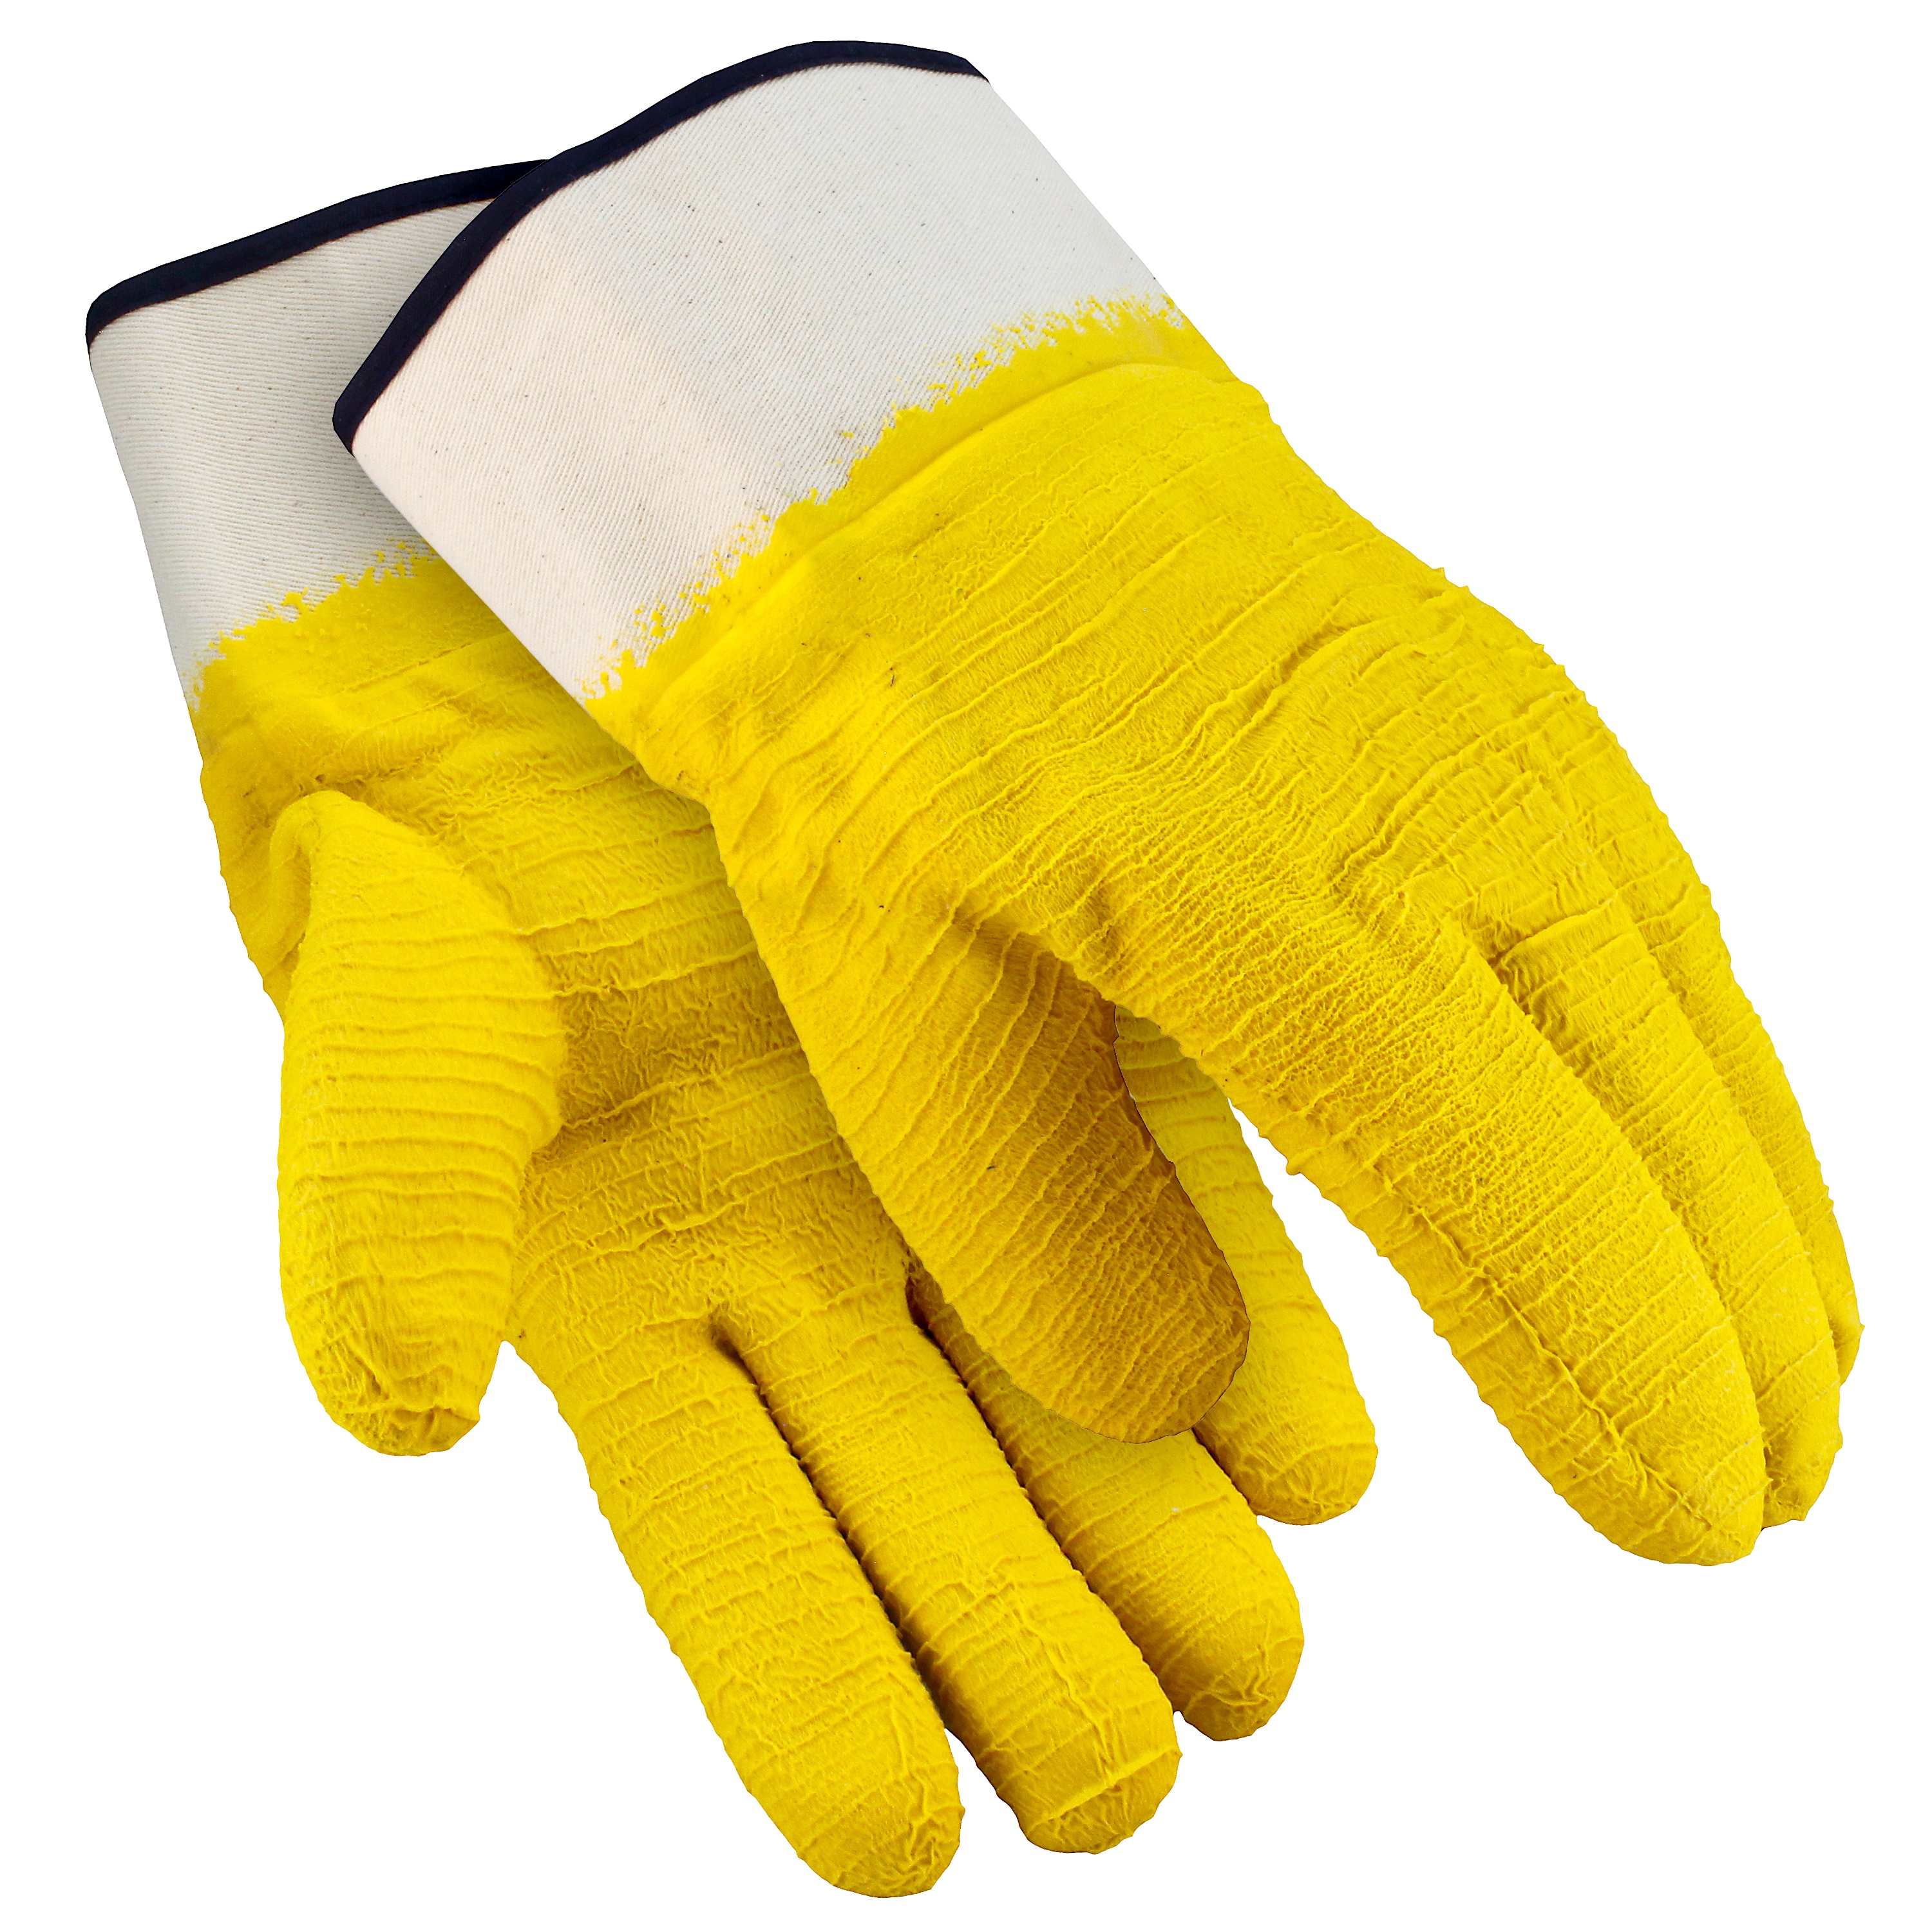 Glacier Grip Insulated Rubber Coated Gloves, Safety Cuff